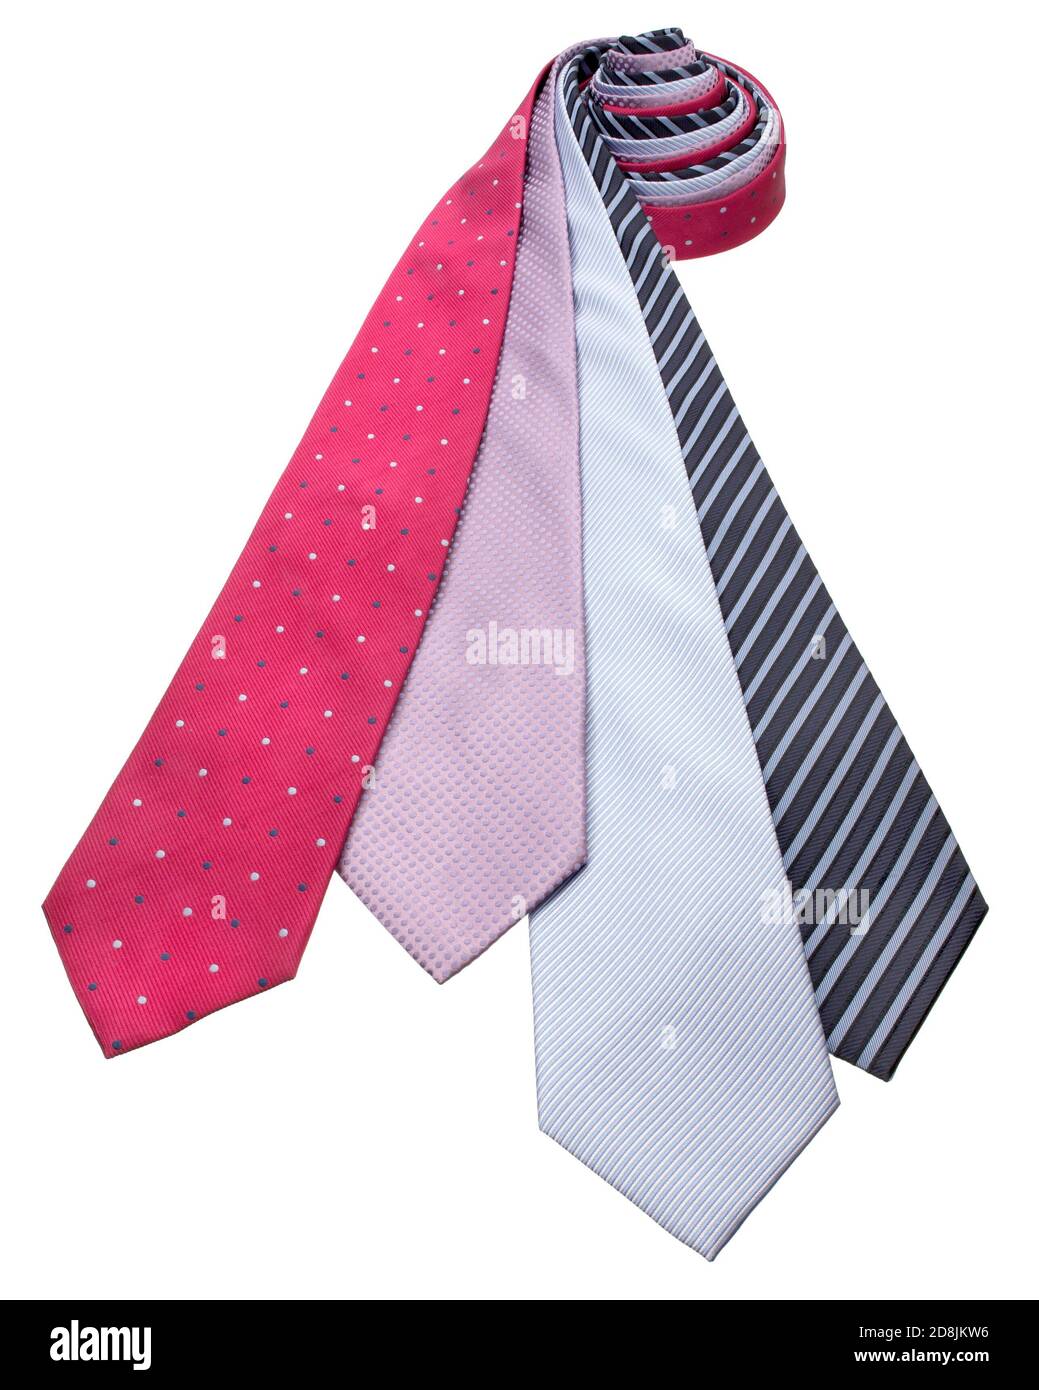 Set of four neckties coiled together photographed on a white background Stock Photo